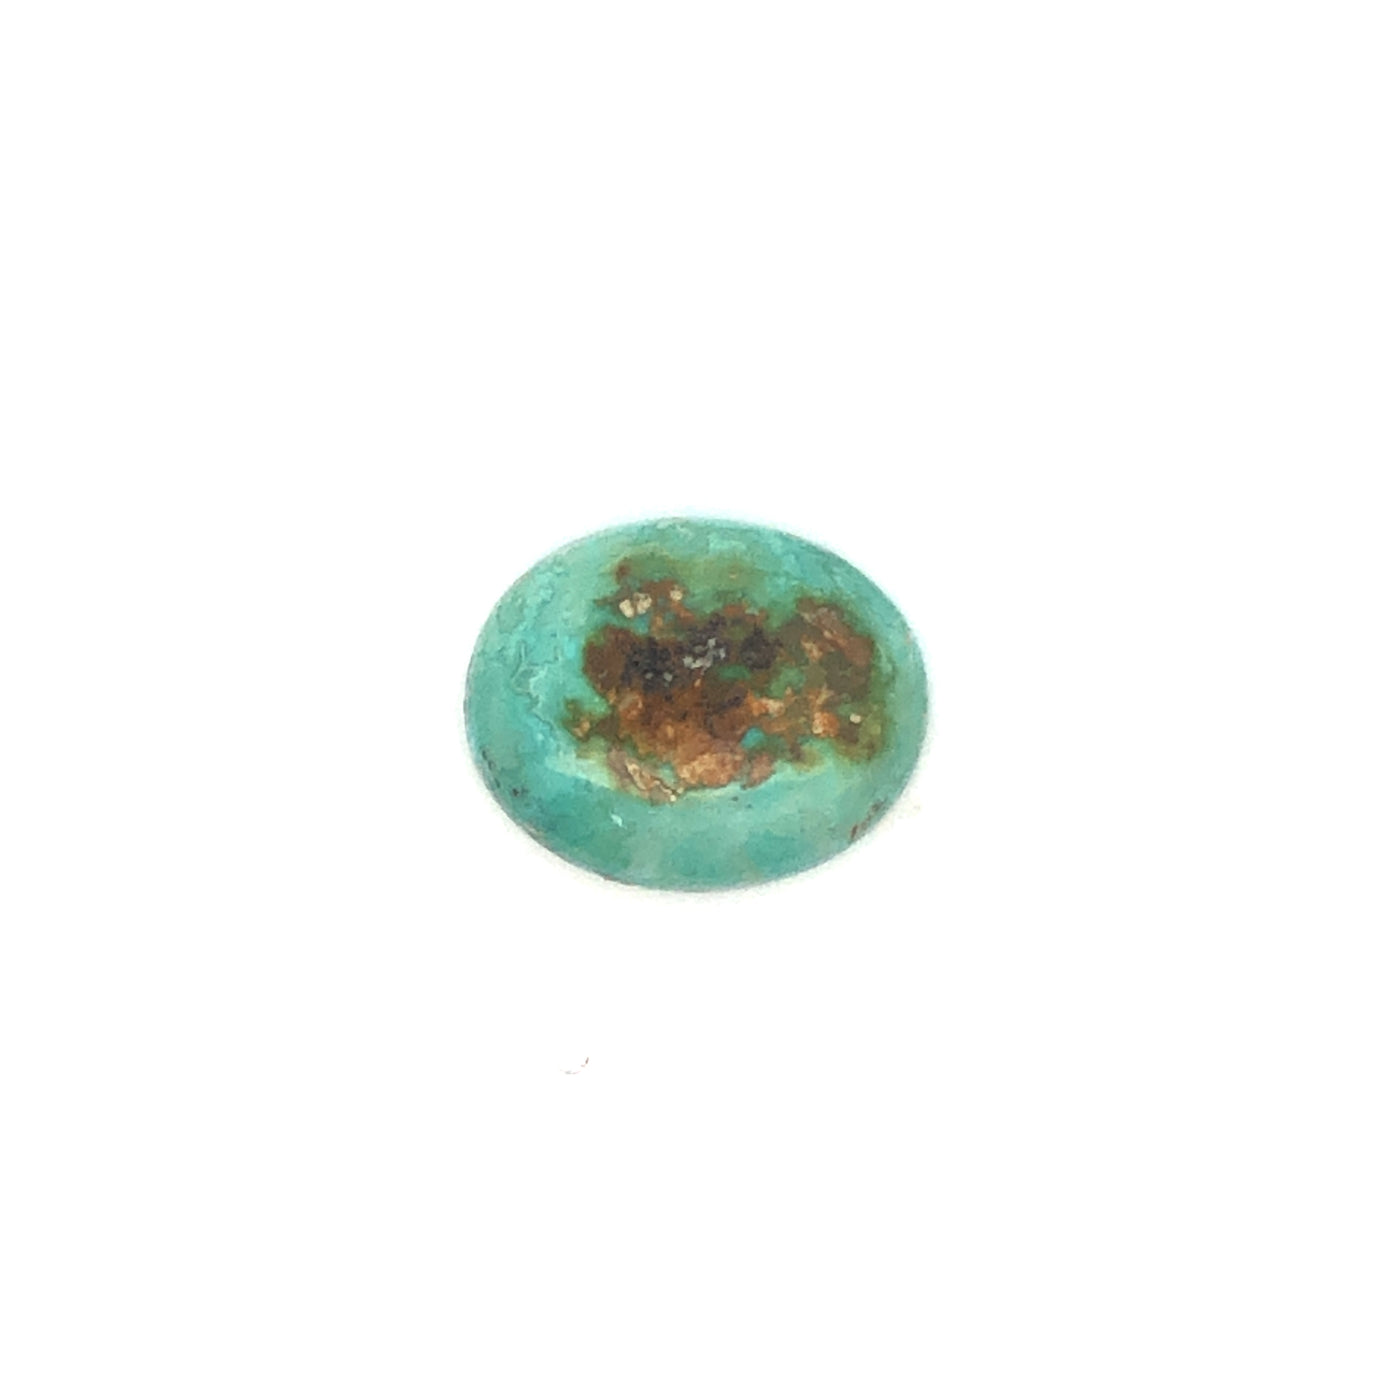 Loose Narooma Turquoise Oval Shaped 16.41Ct Blue With Some Brown